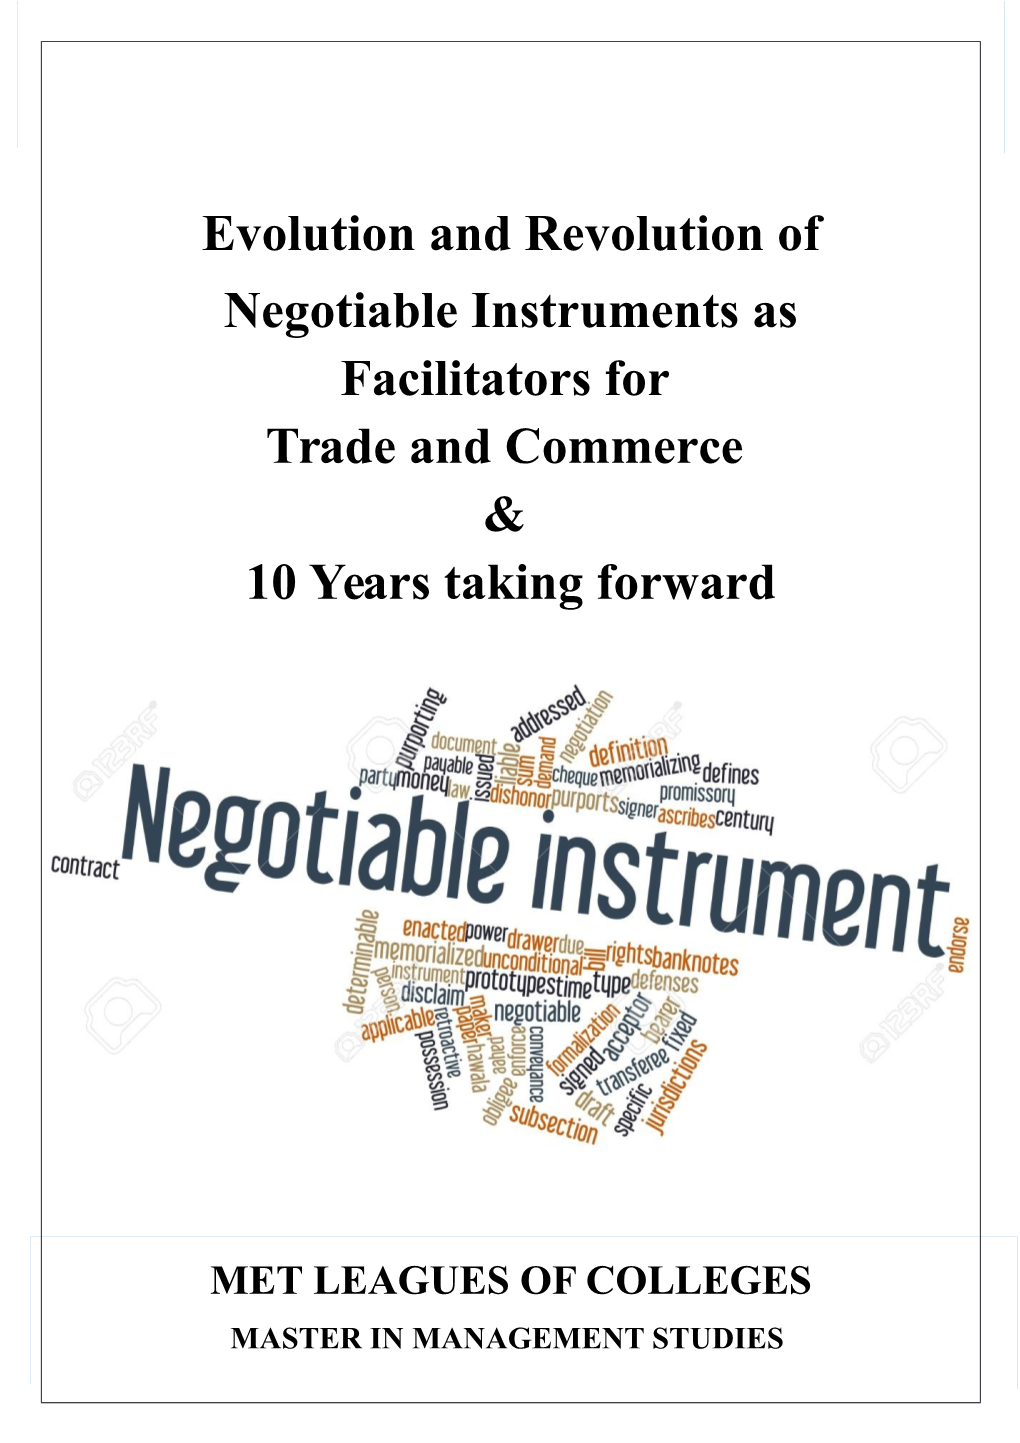 Evolution and Revolution of Negotiable Instruments As Facilitators for Trade and Commerce & 10 Years Taking Forward